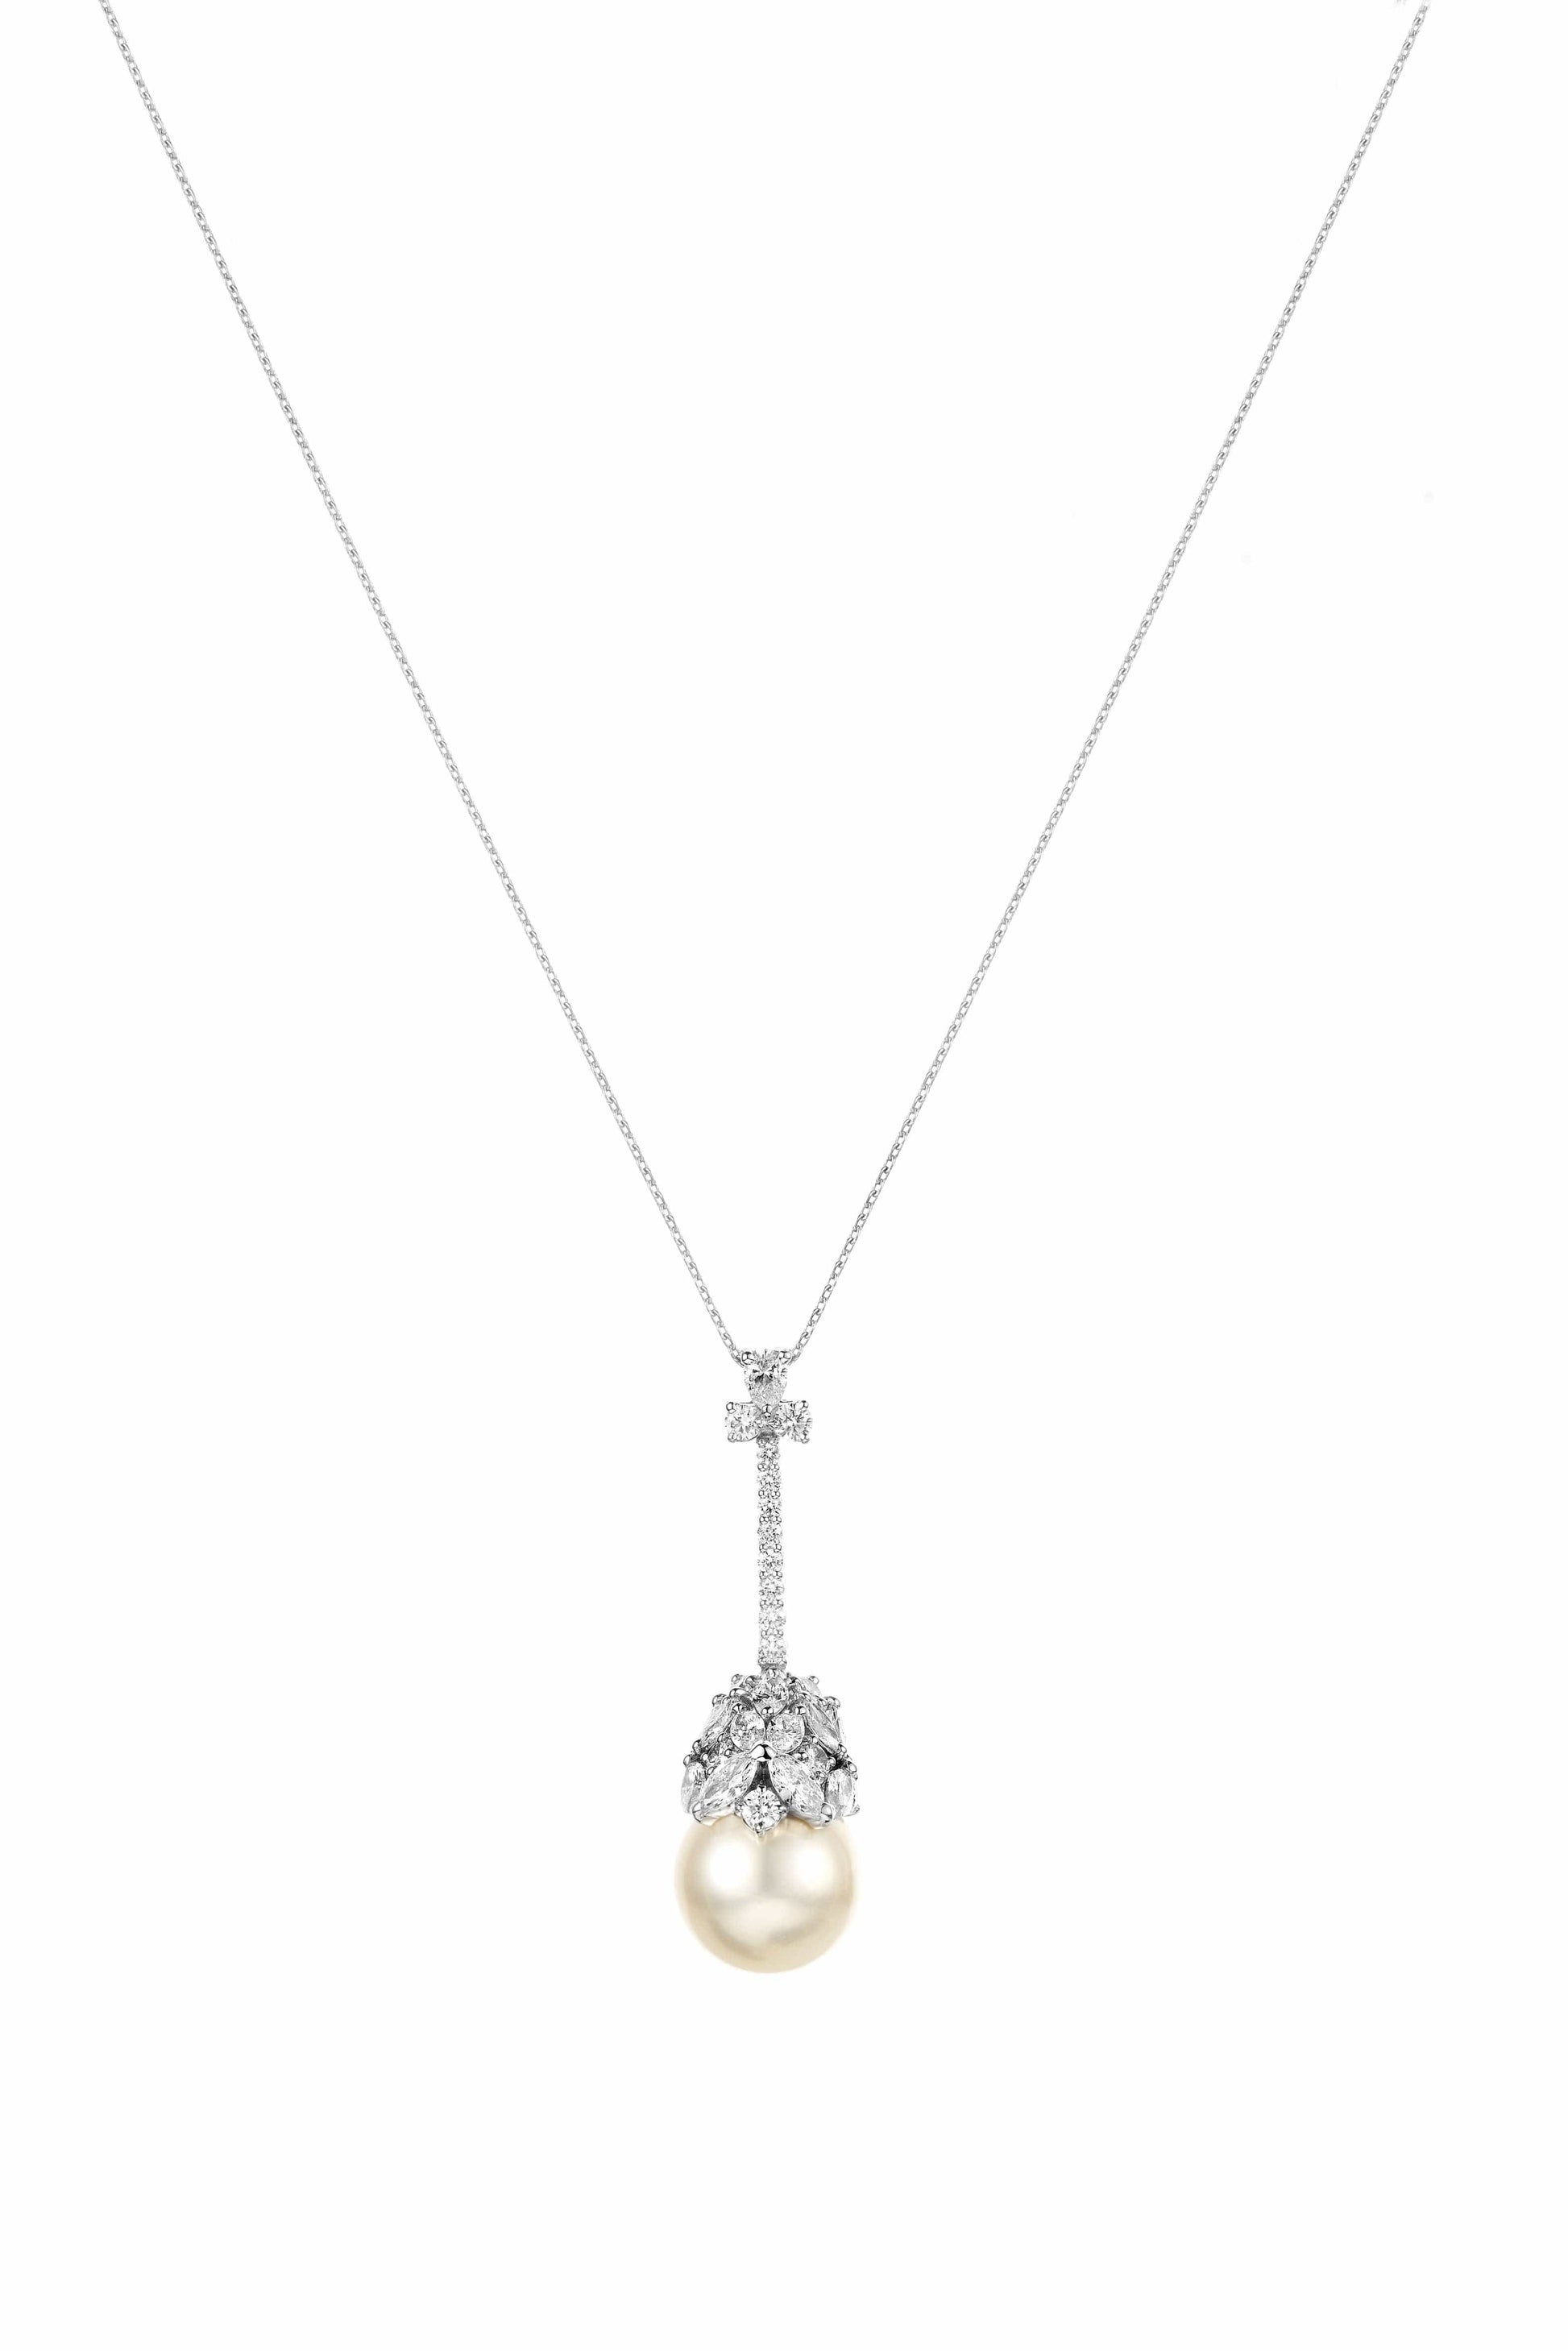 YEPREM JEWELLERY-Pearl and Diamond Drop Necklace-WHITE GOLD